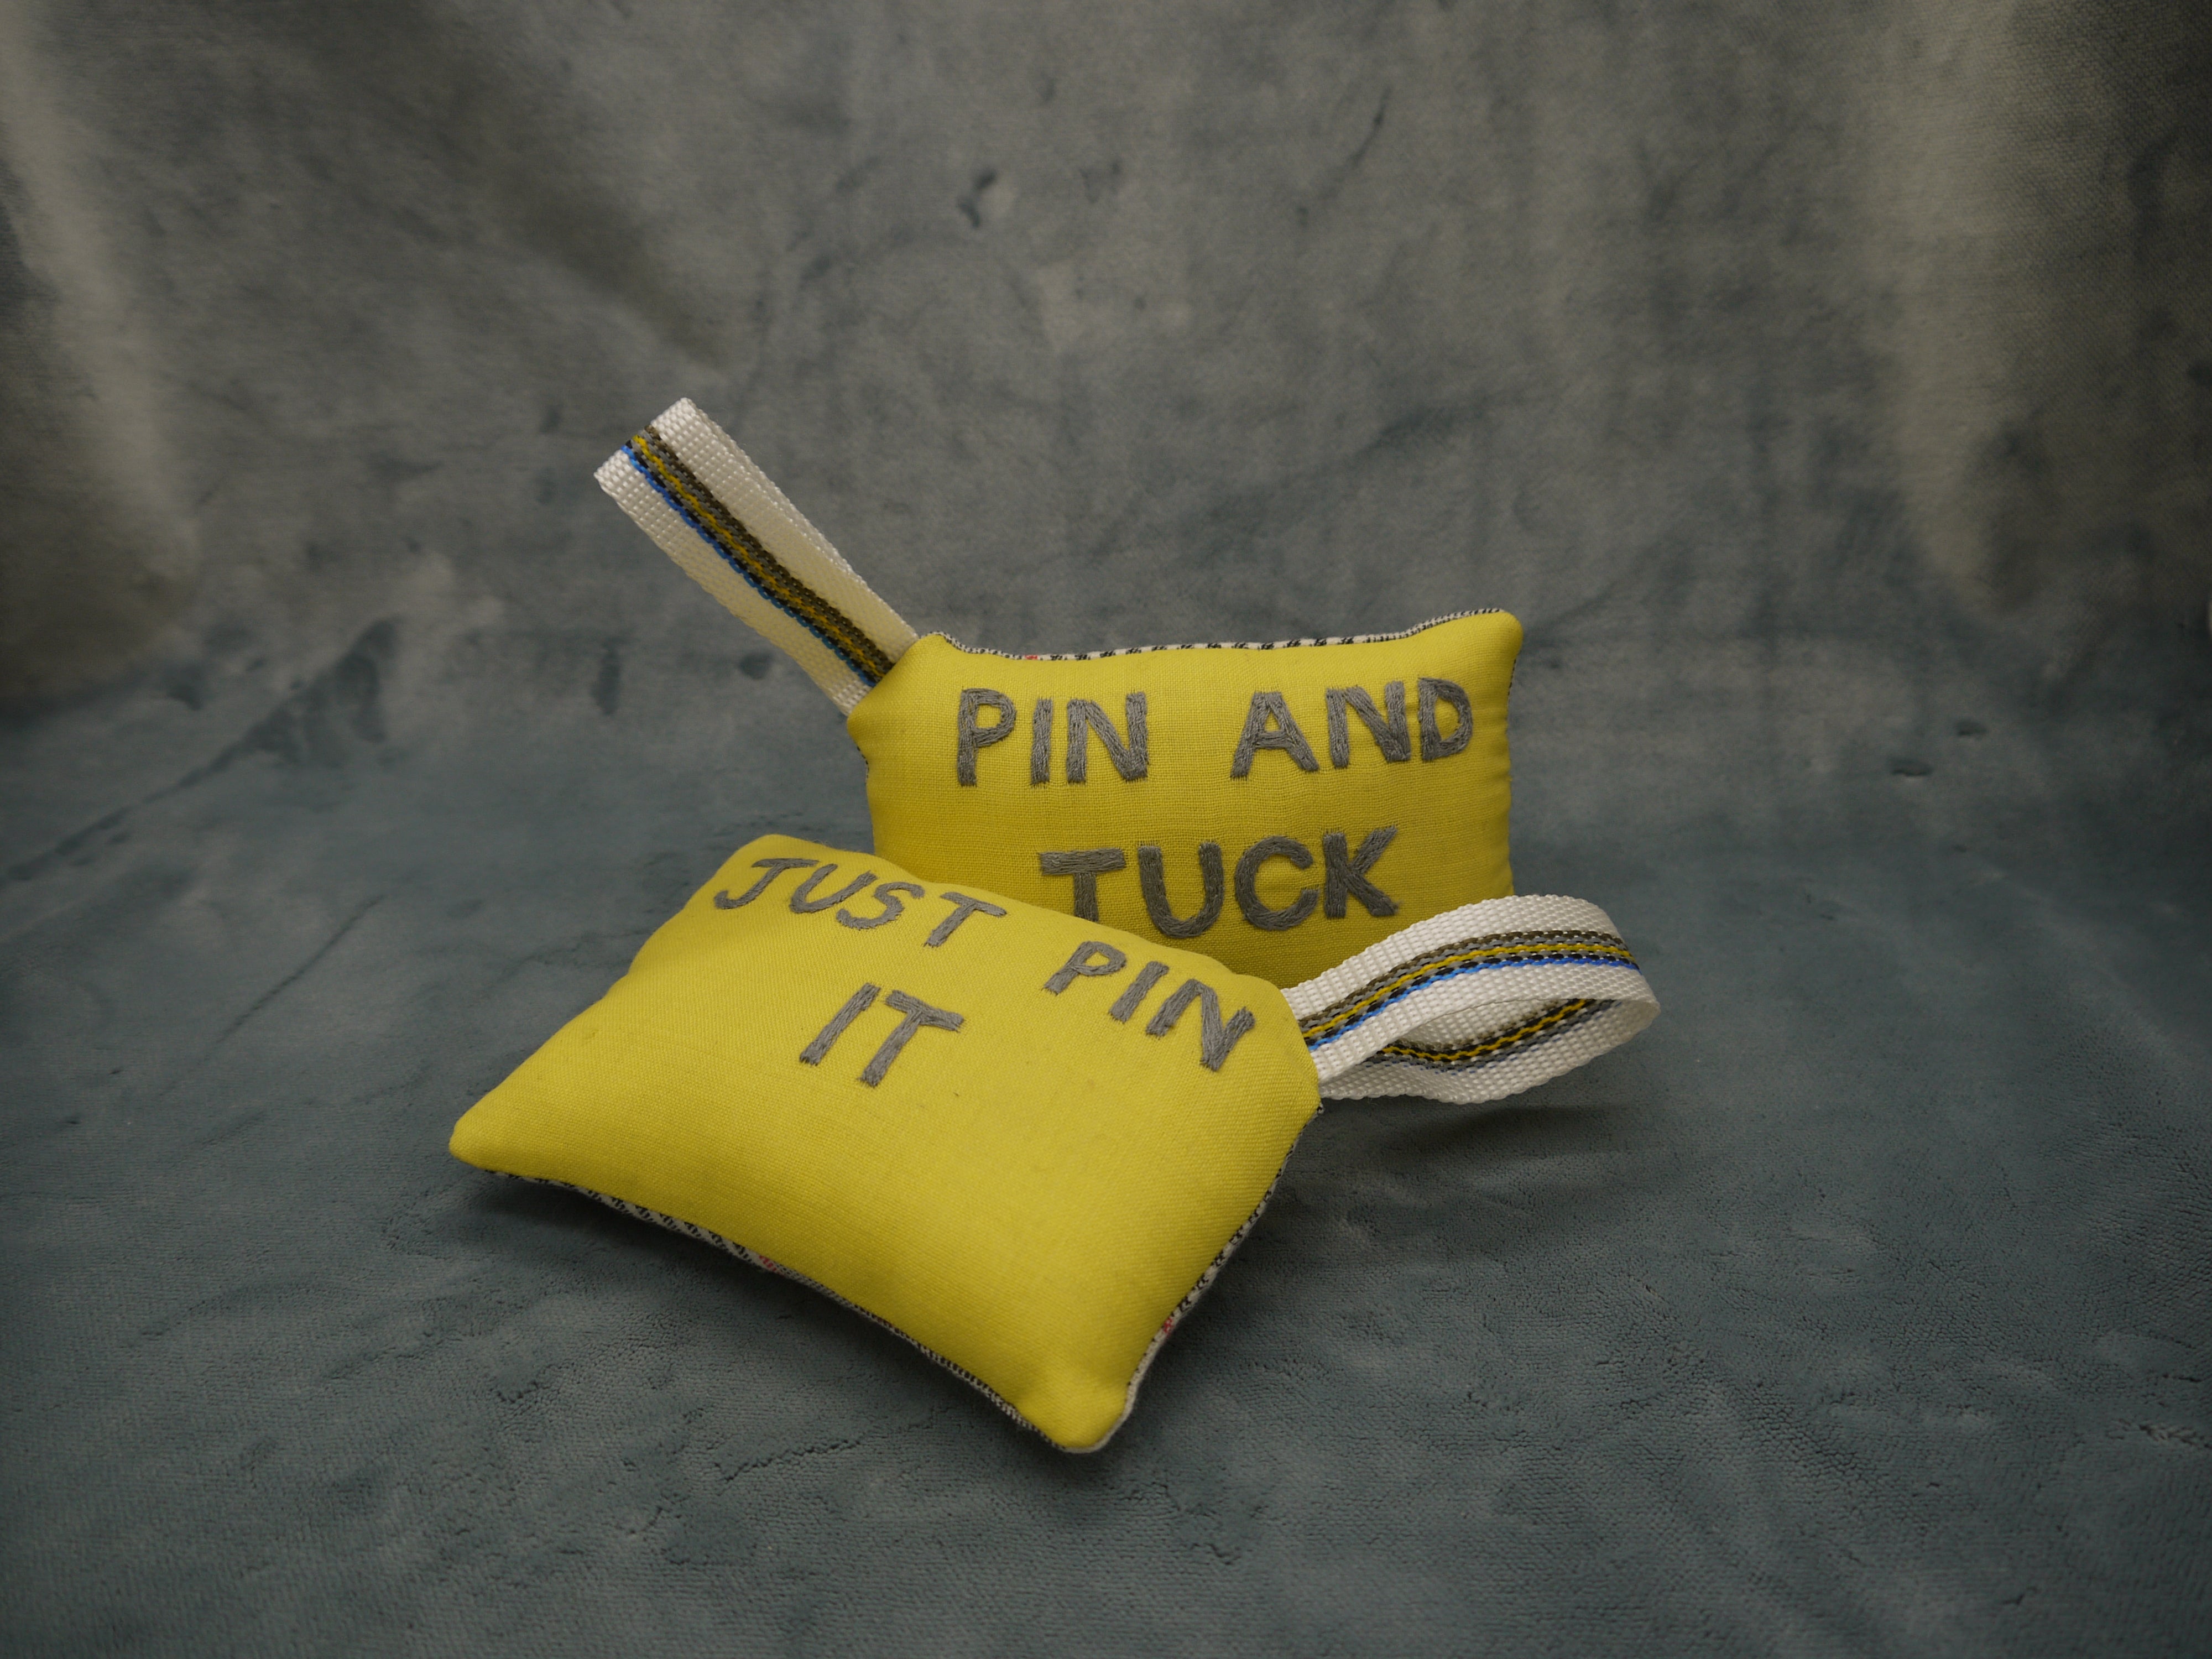 Pin cushion in yellow and grey wool, superfine 120, Just Pin It Embroidered by hand in grey on a yellow background, Nylon wriststrap with yellow/blue go stripe, Prince of Wales wool backing in white and black.PIn and Tuck  pincushion visible in the background